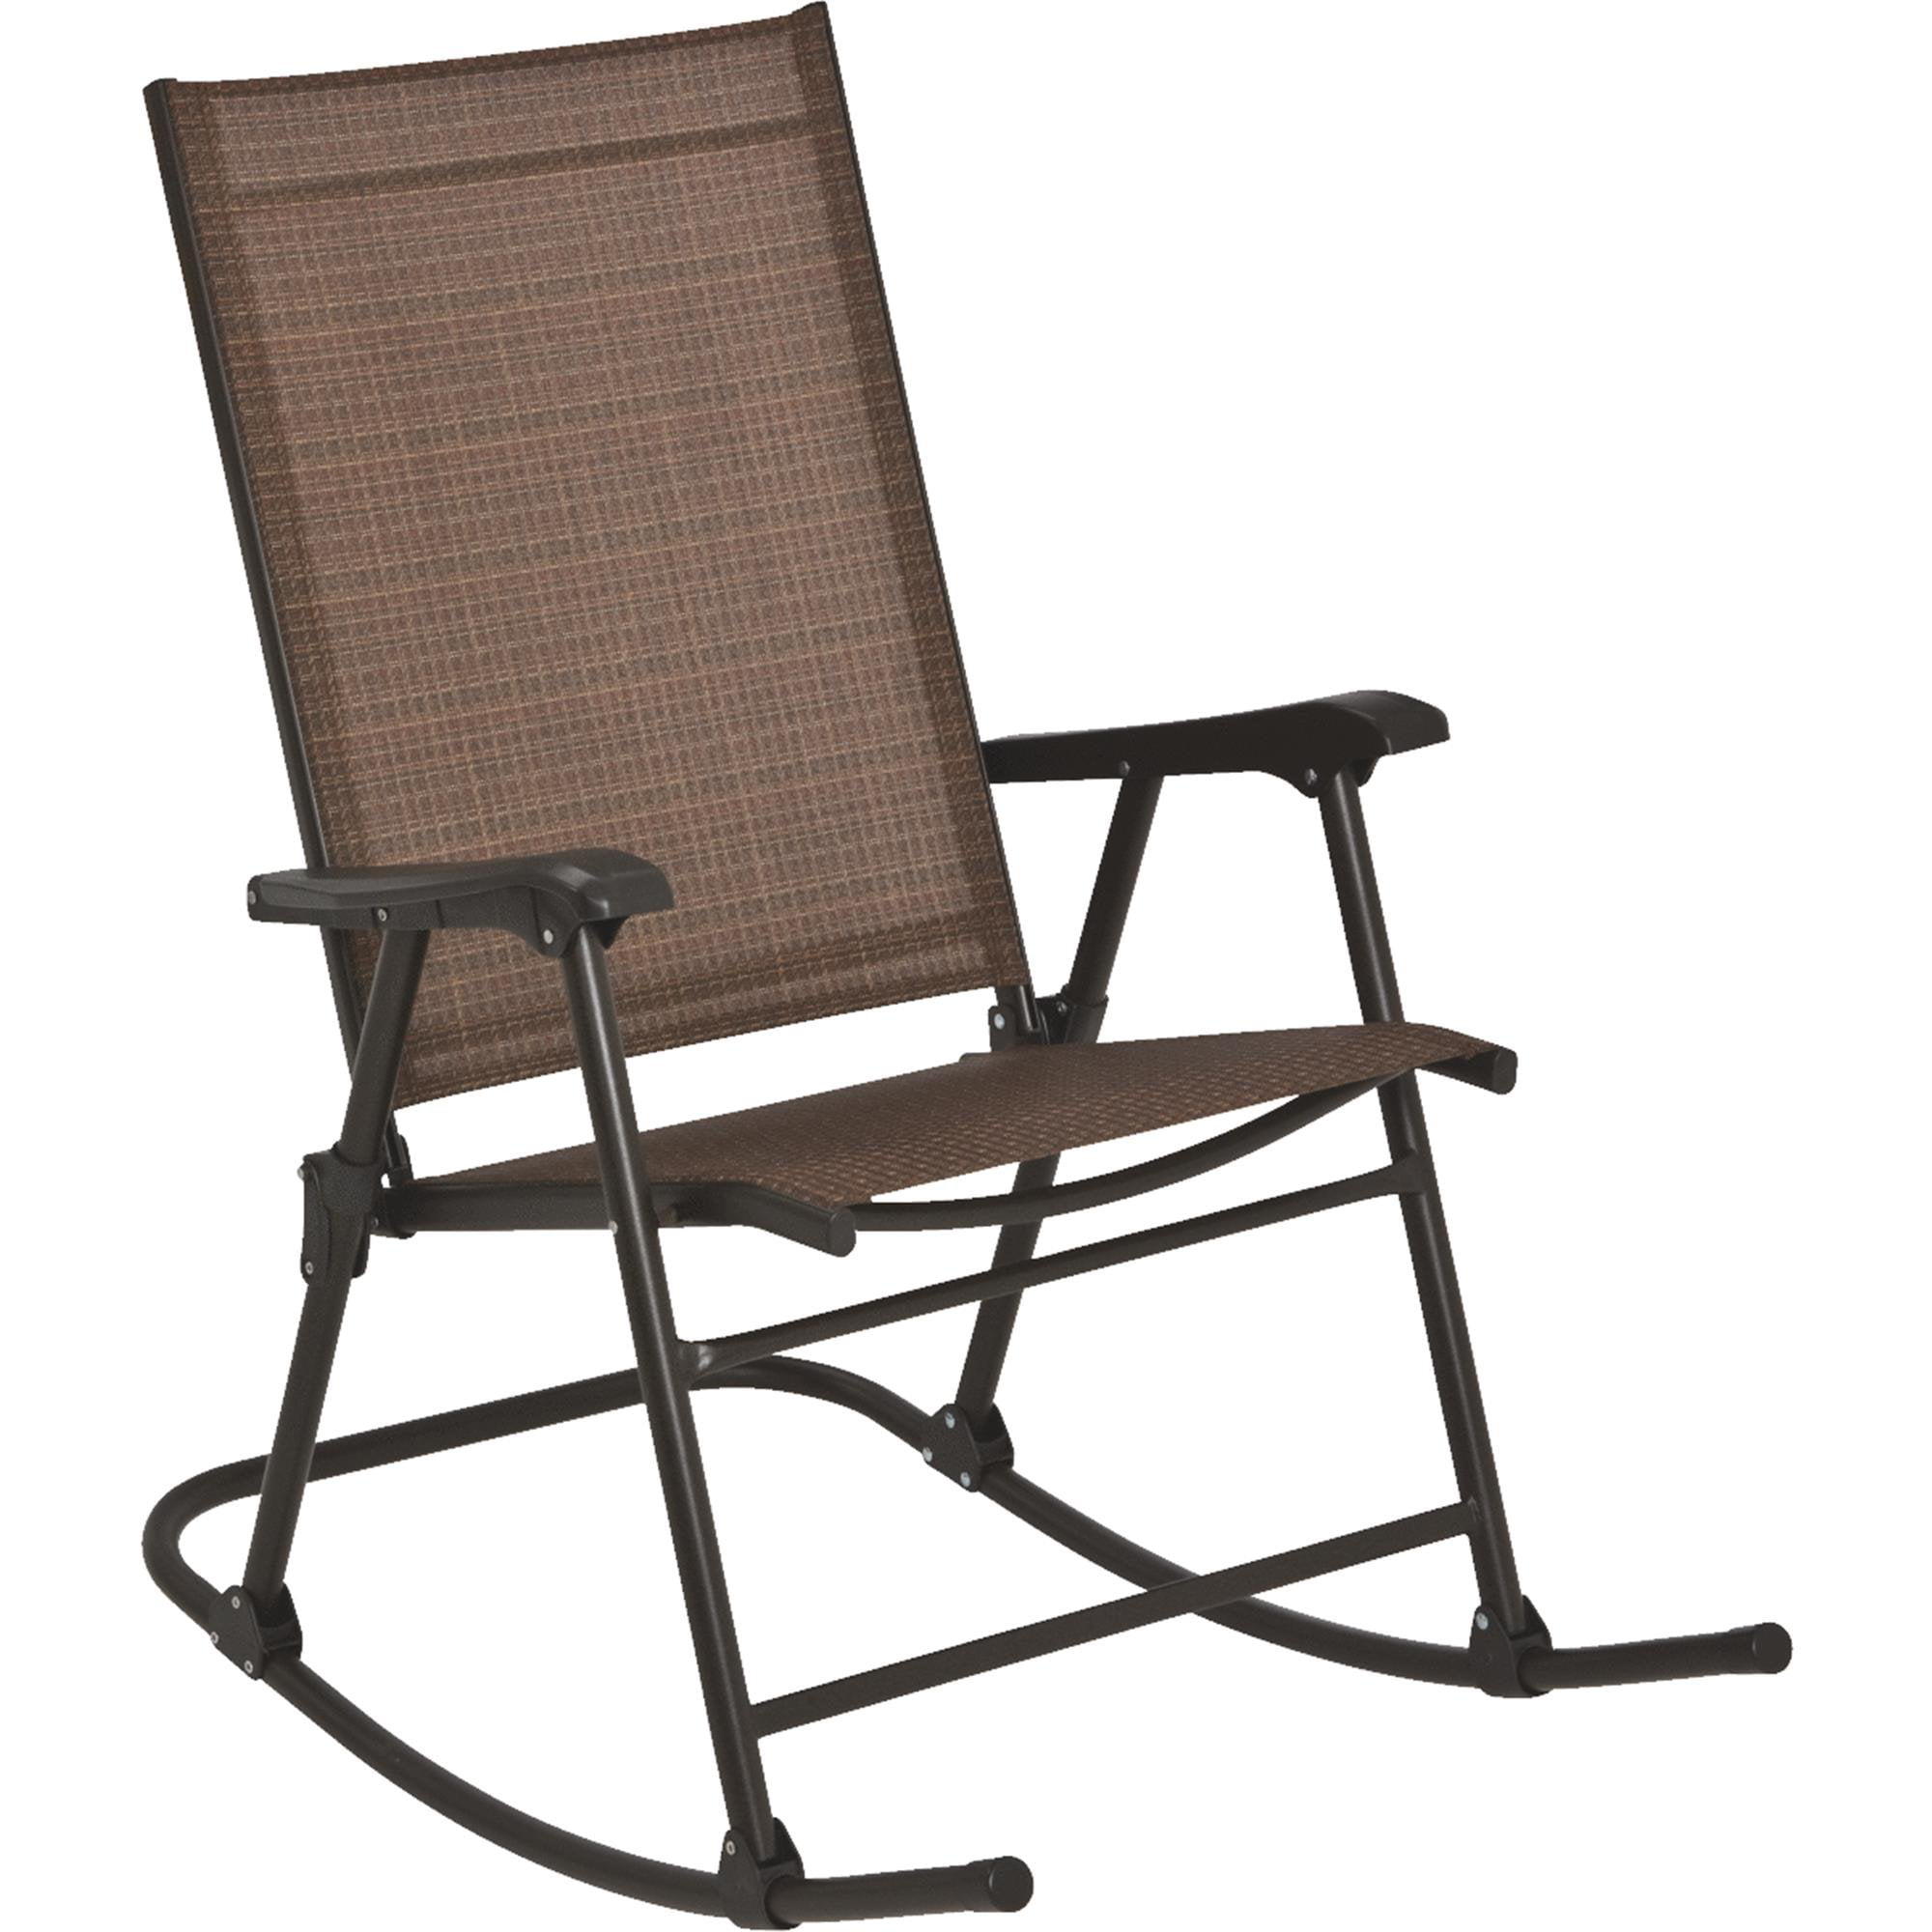 Featured image of post Outdoor Rocking Chair At Walmart - Popular outdoor rocking chair of good quality and at affordable prices you can buy on aliexpress.